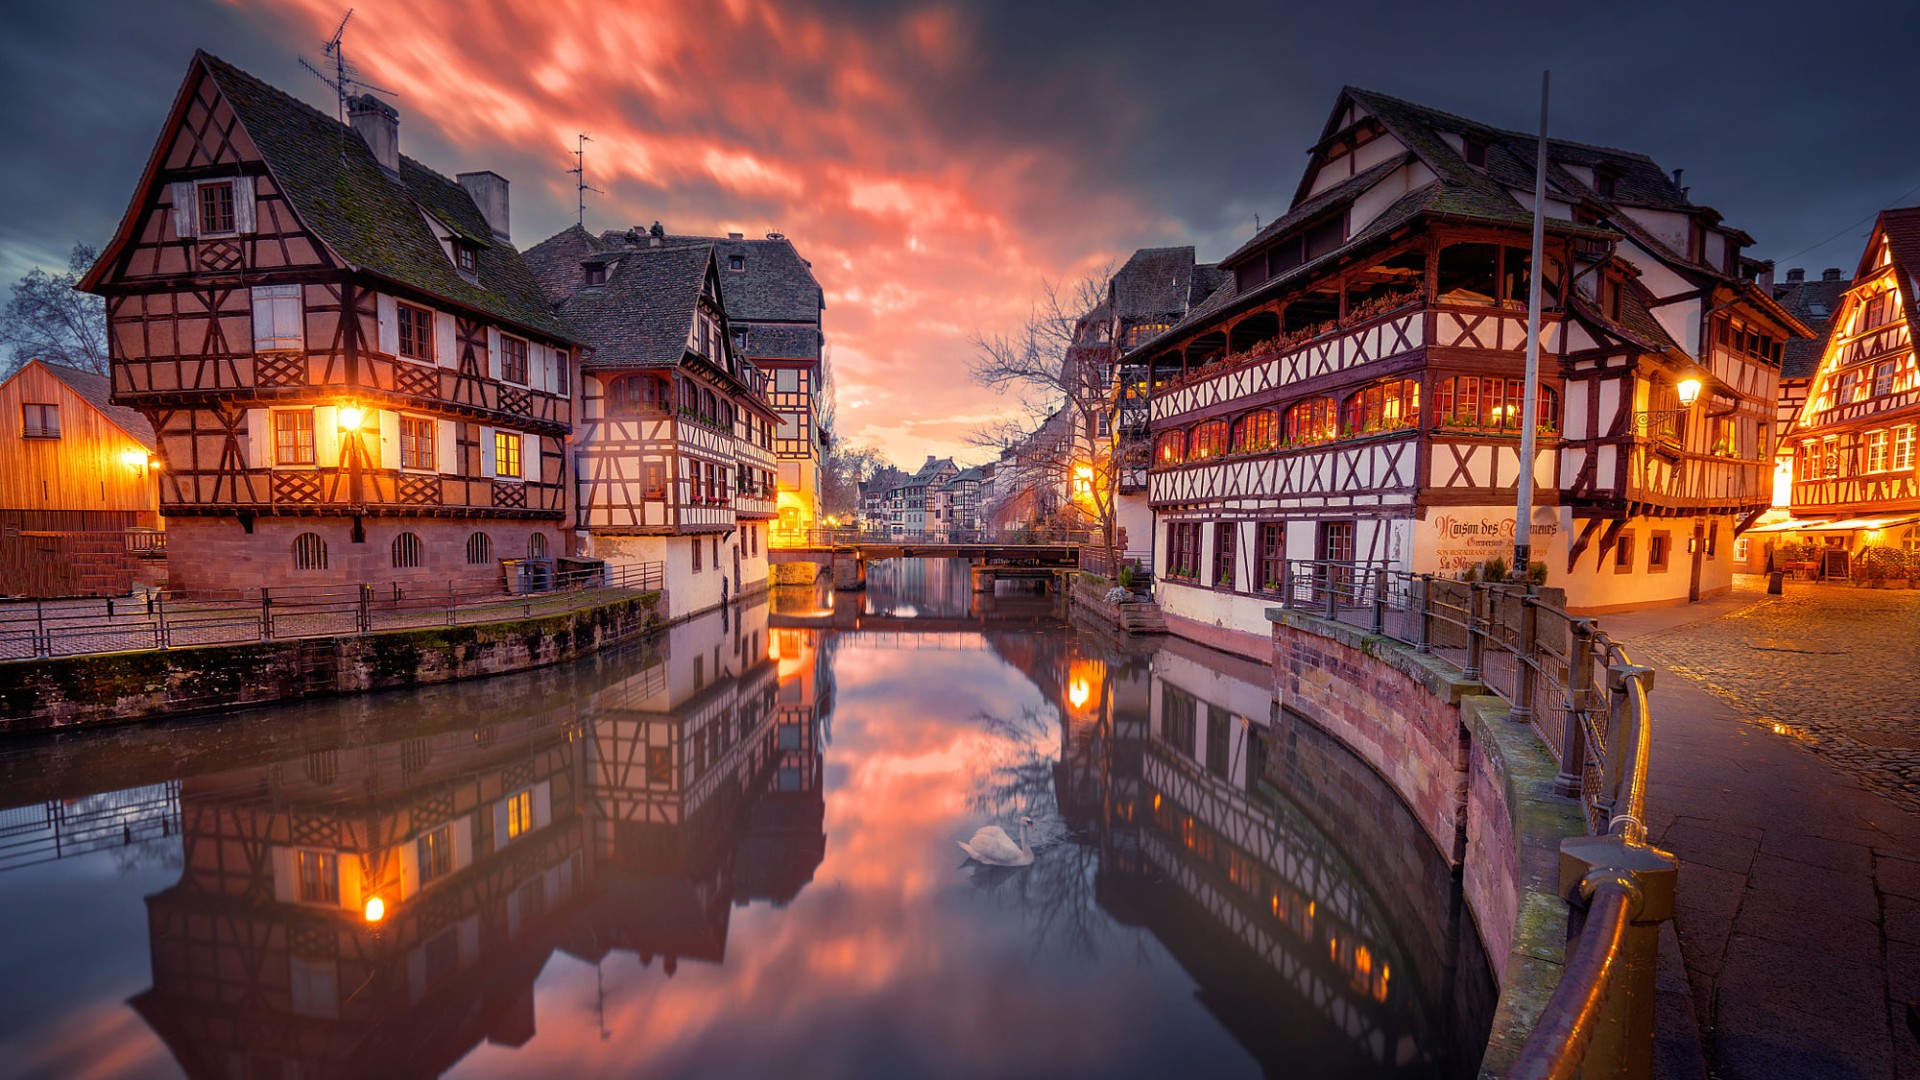 General 1920x1080 architecture building city cityscape Strasbourg France old building house lights sunset clouds evening reflection river street bridge